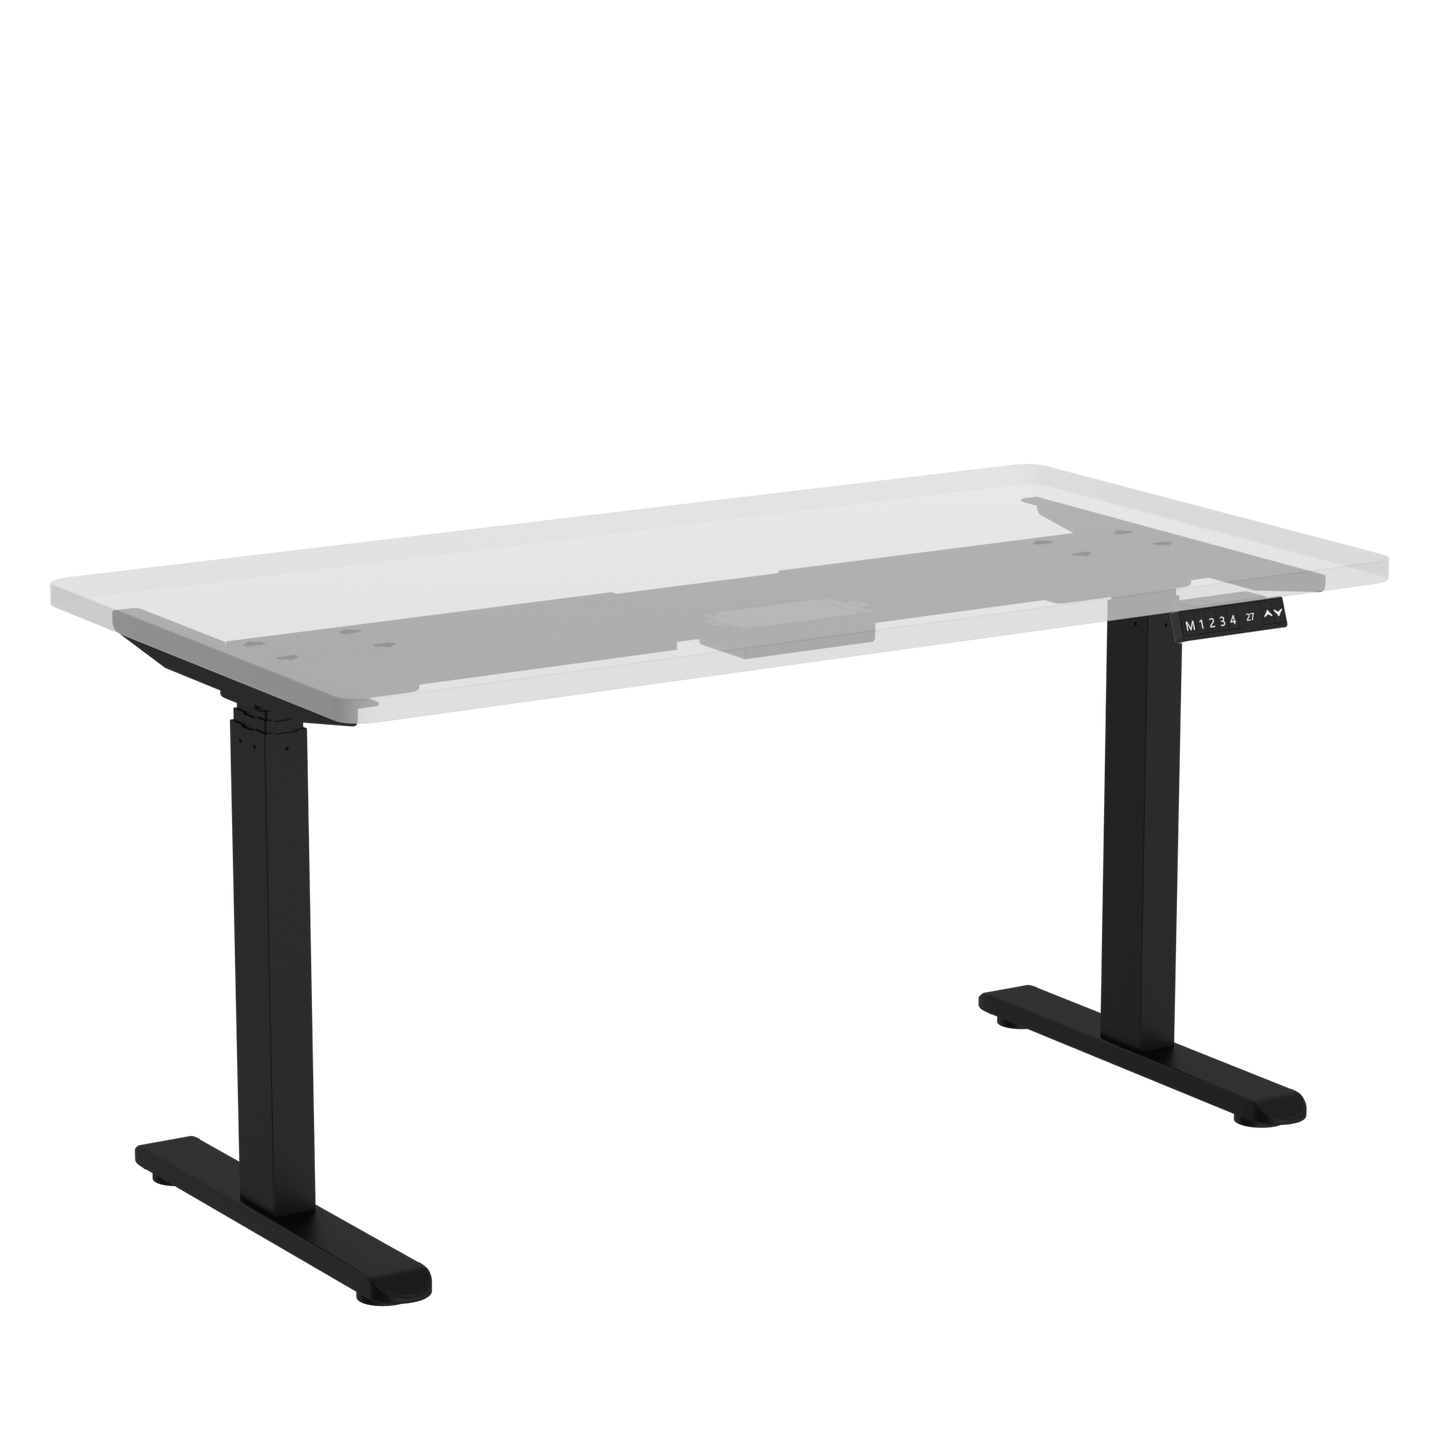 Height Adjustable Table Legs Sit Stand Desk Frame